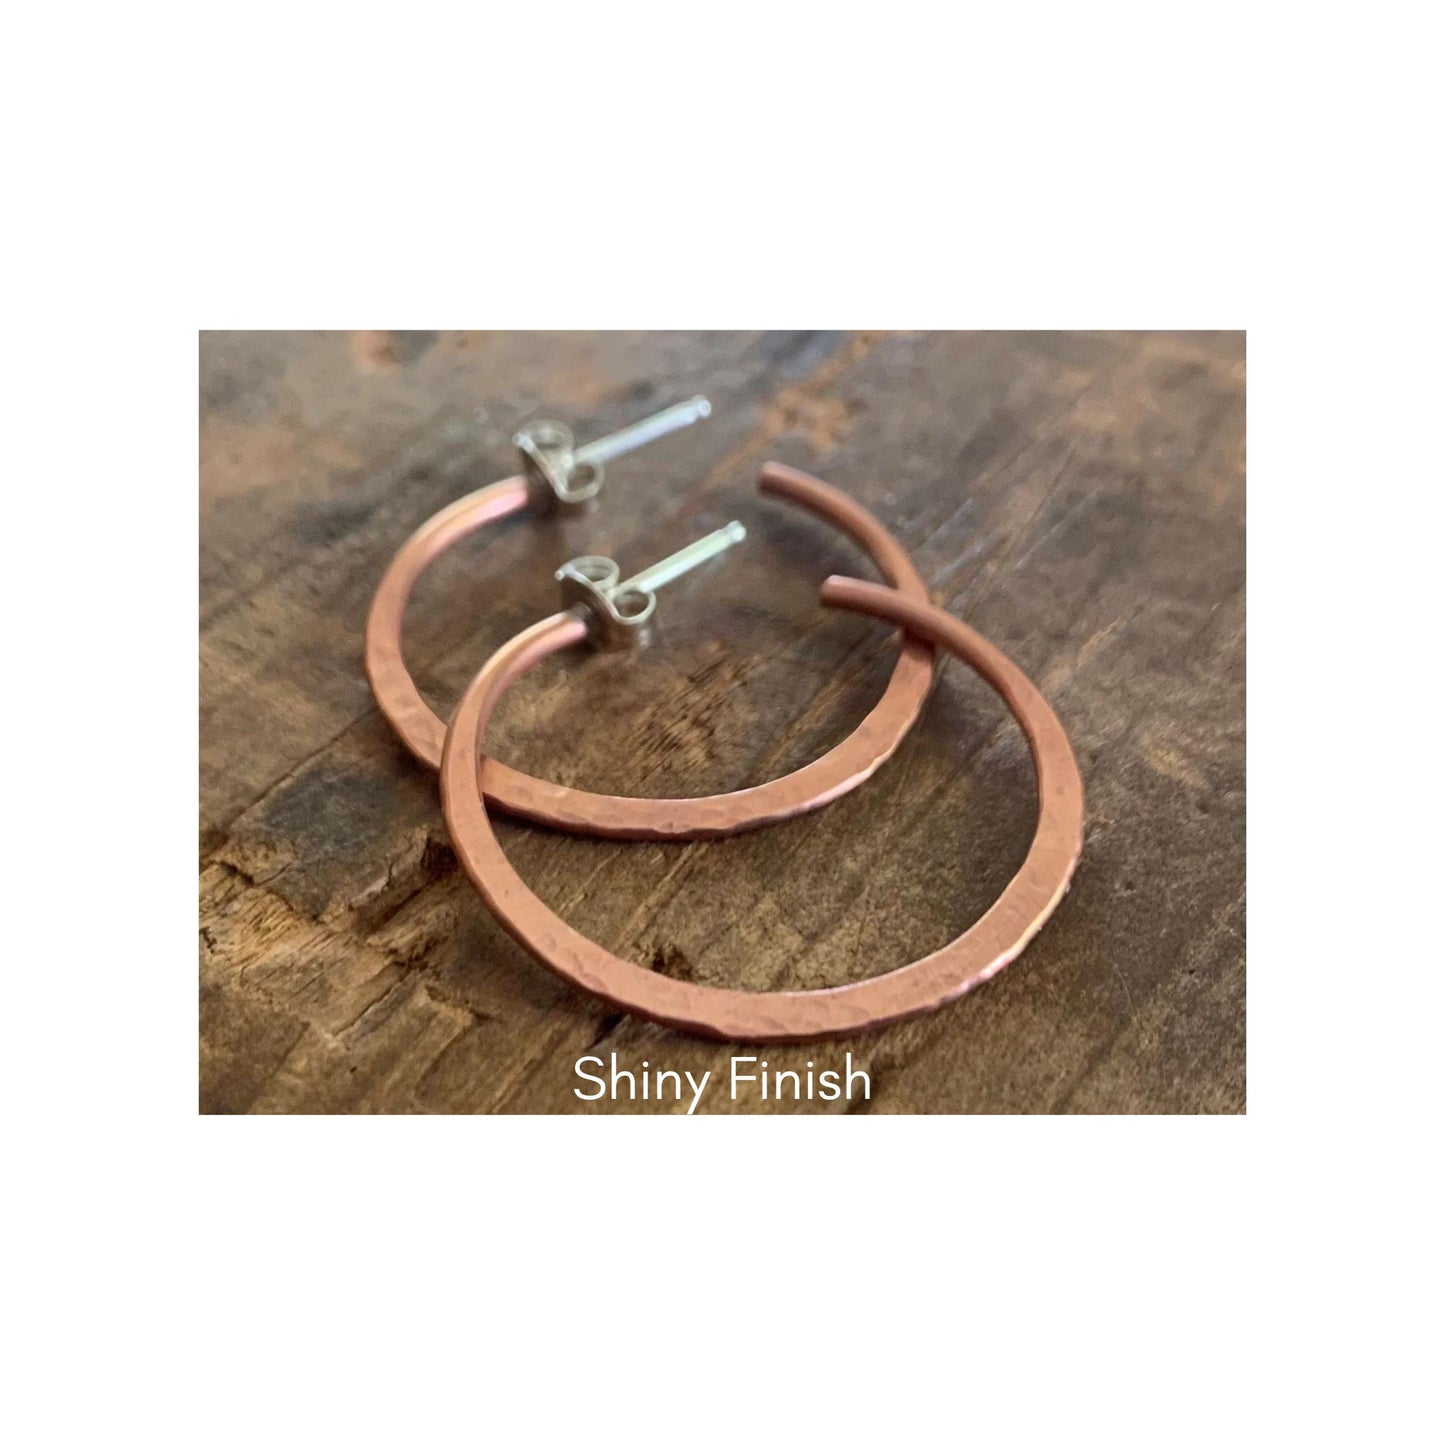 NEW Copper Mangly Hoops with Post - Thick Gauge Copper & Sterling Silver Post Hoops. Handmade. Hammered. Light Weight Hoops